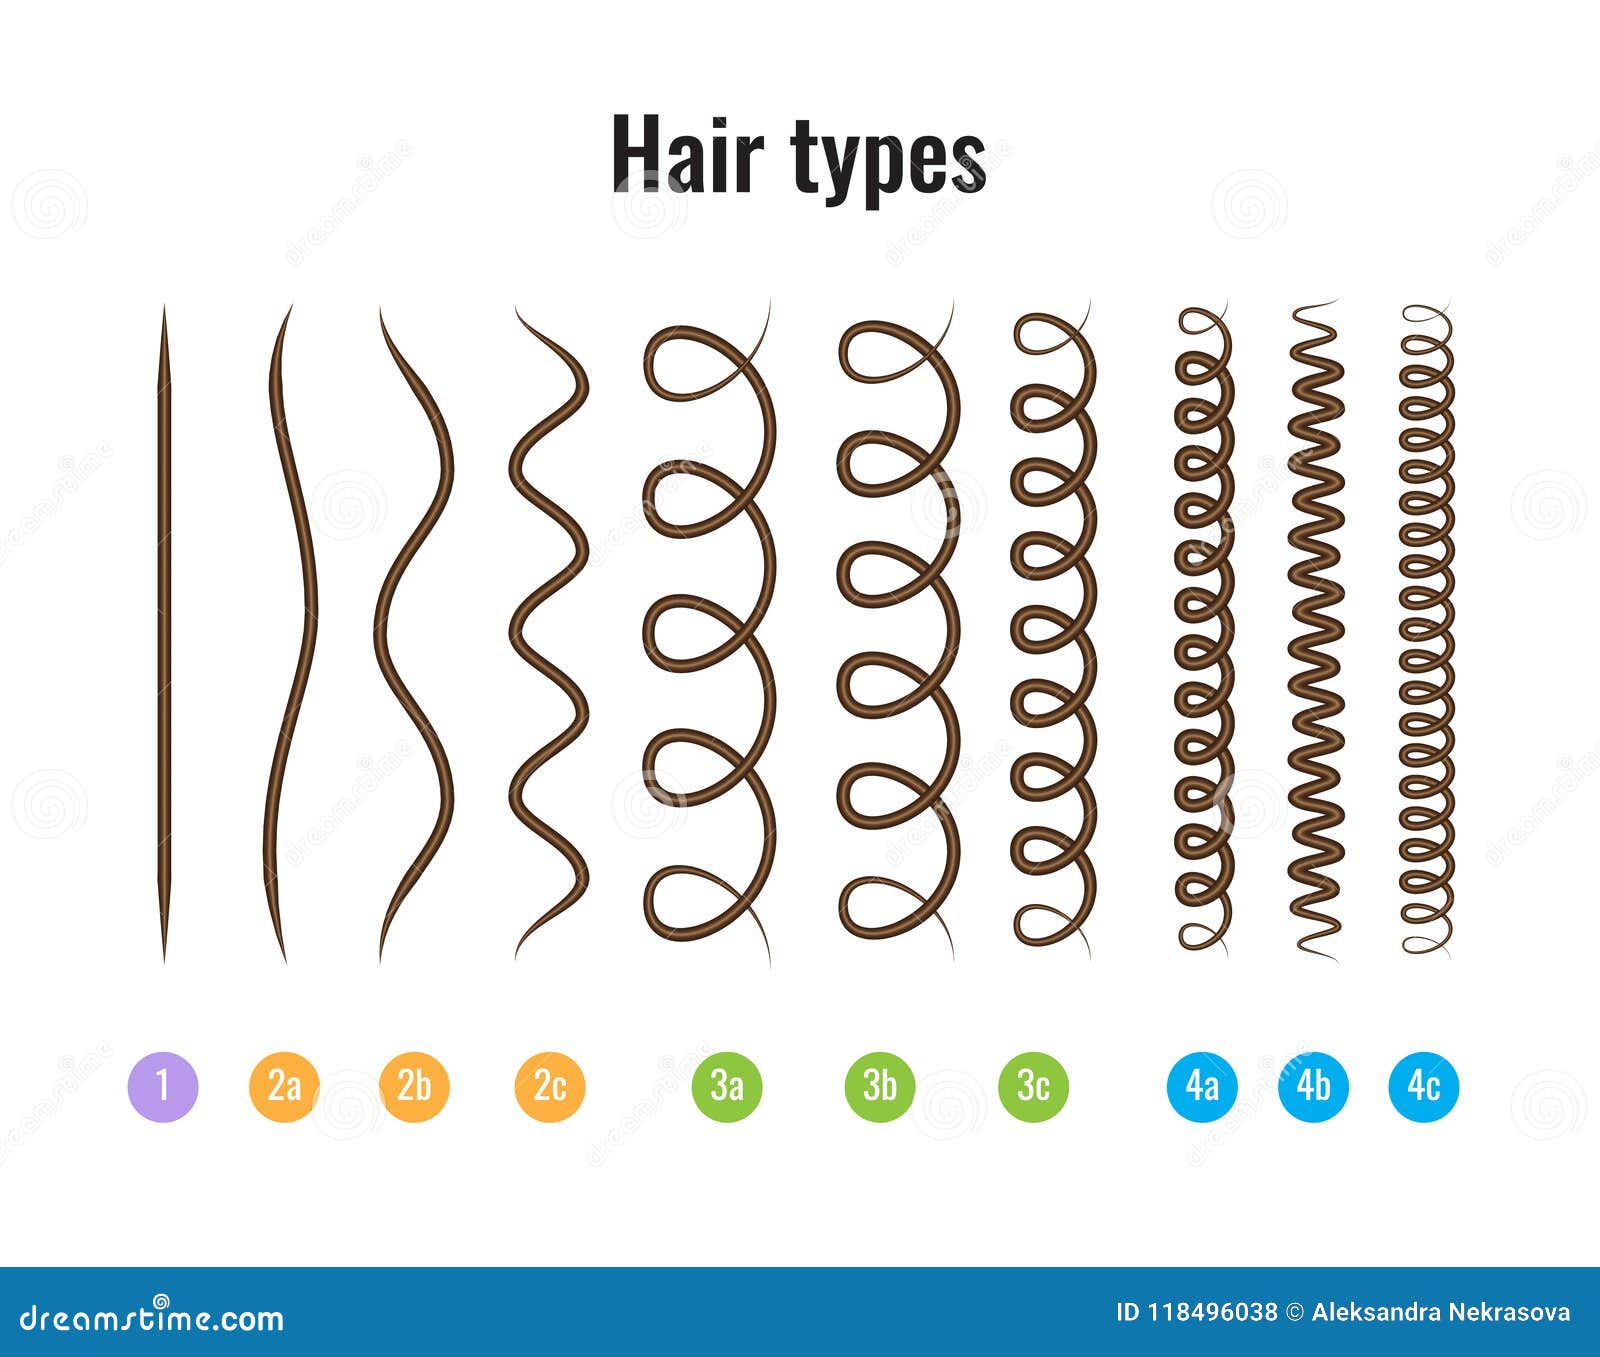 Vector Illustration of a Hair Types Chart Displaying All Types and Labeled.  Stock Vector - Illustration of diagram, chart: 118496038